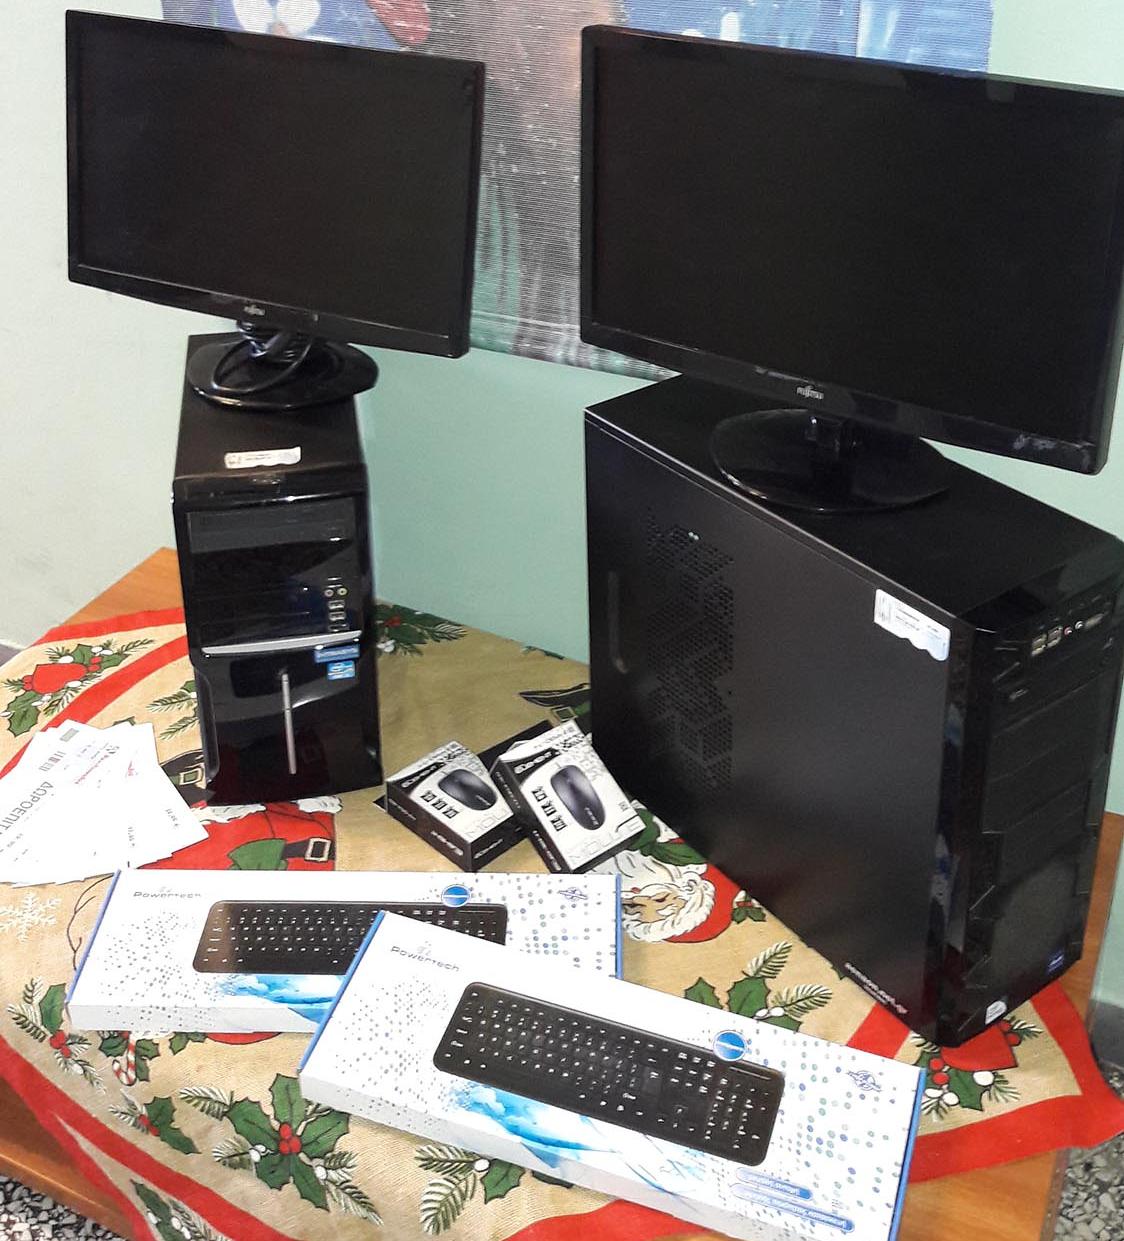 Computer and vouchers for the children of the orphanage Arsis